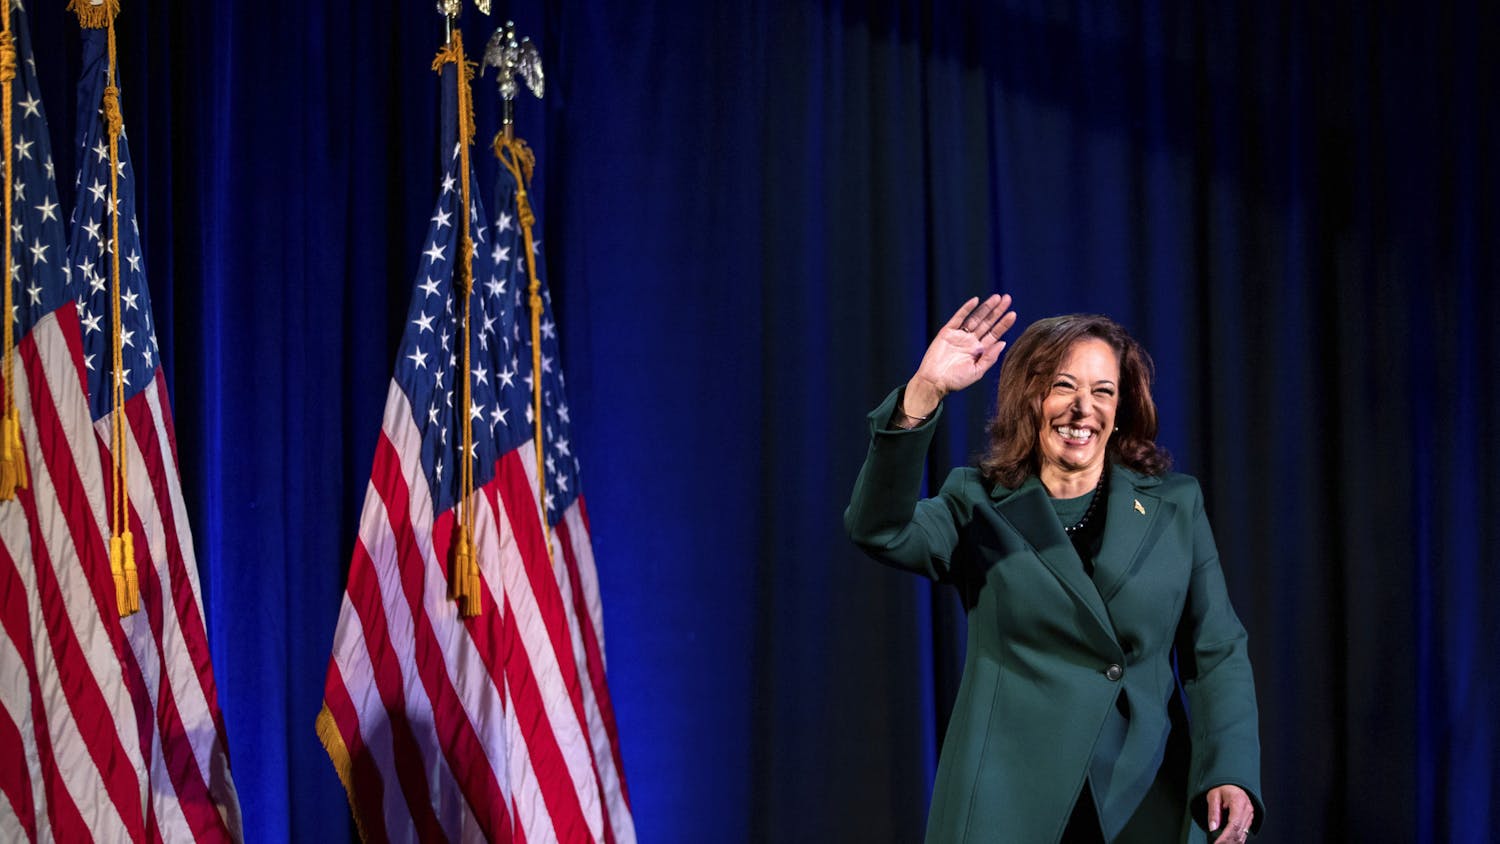 Vice President Kamala Harris waves to a crowd at The Moon in Tallahassee, Fla. on the 50th anniversary of the Roe v. Wade Supreme Court ruling, Sunday, Jan. 22, 2023. (Alicia Devine/Tallahassee Democrat via AP)